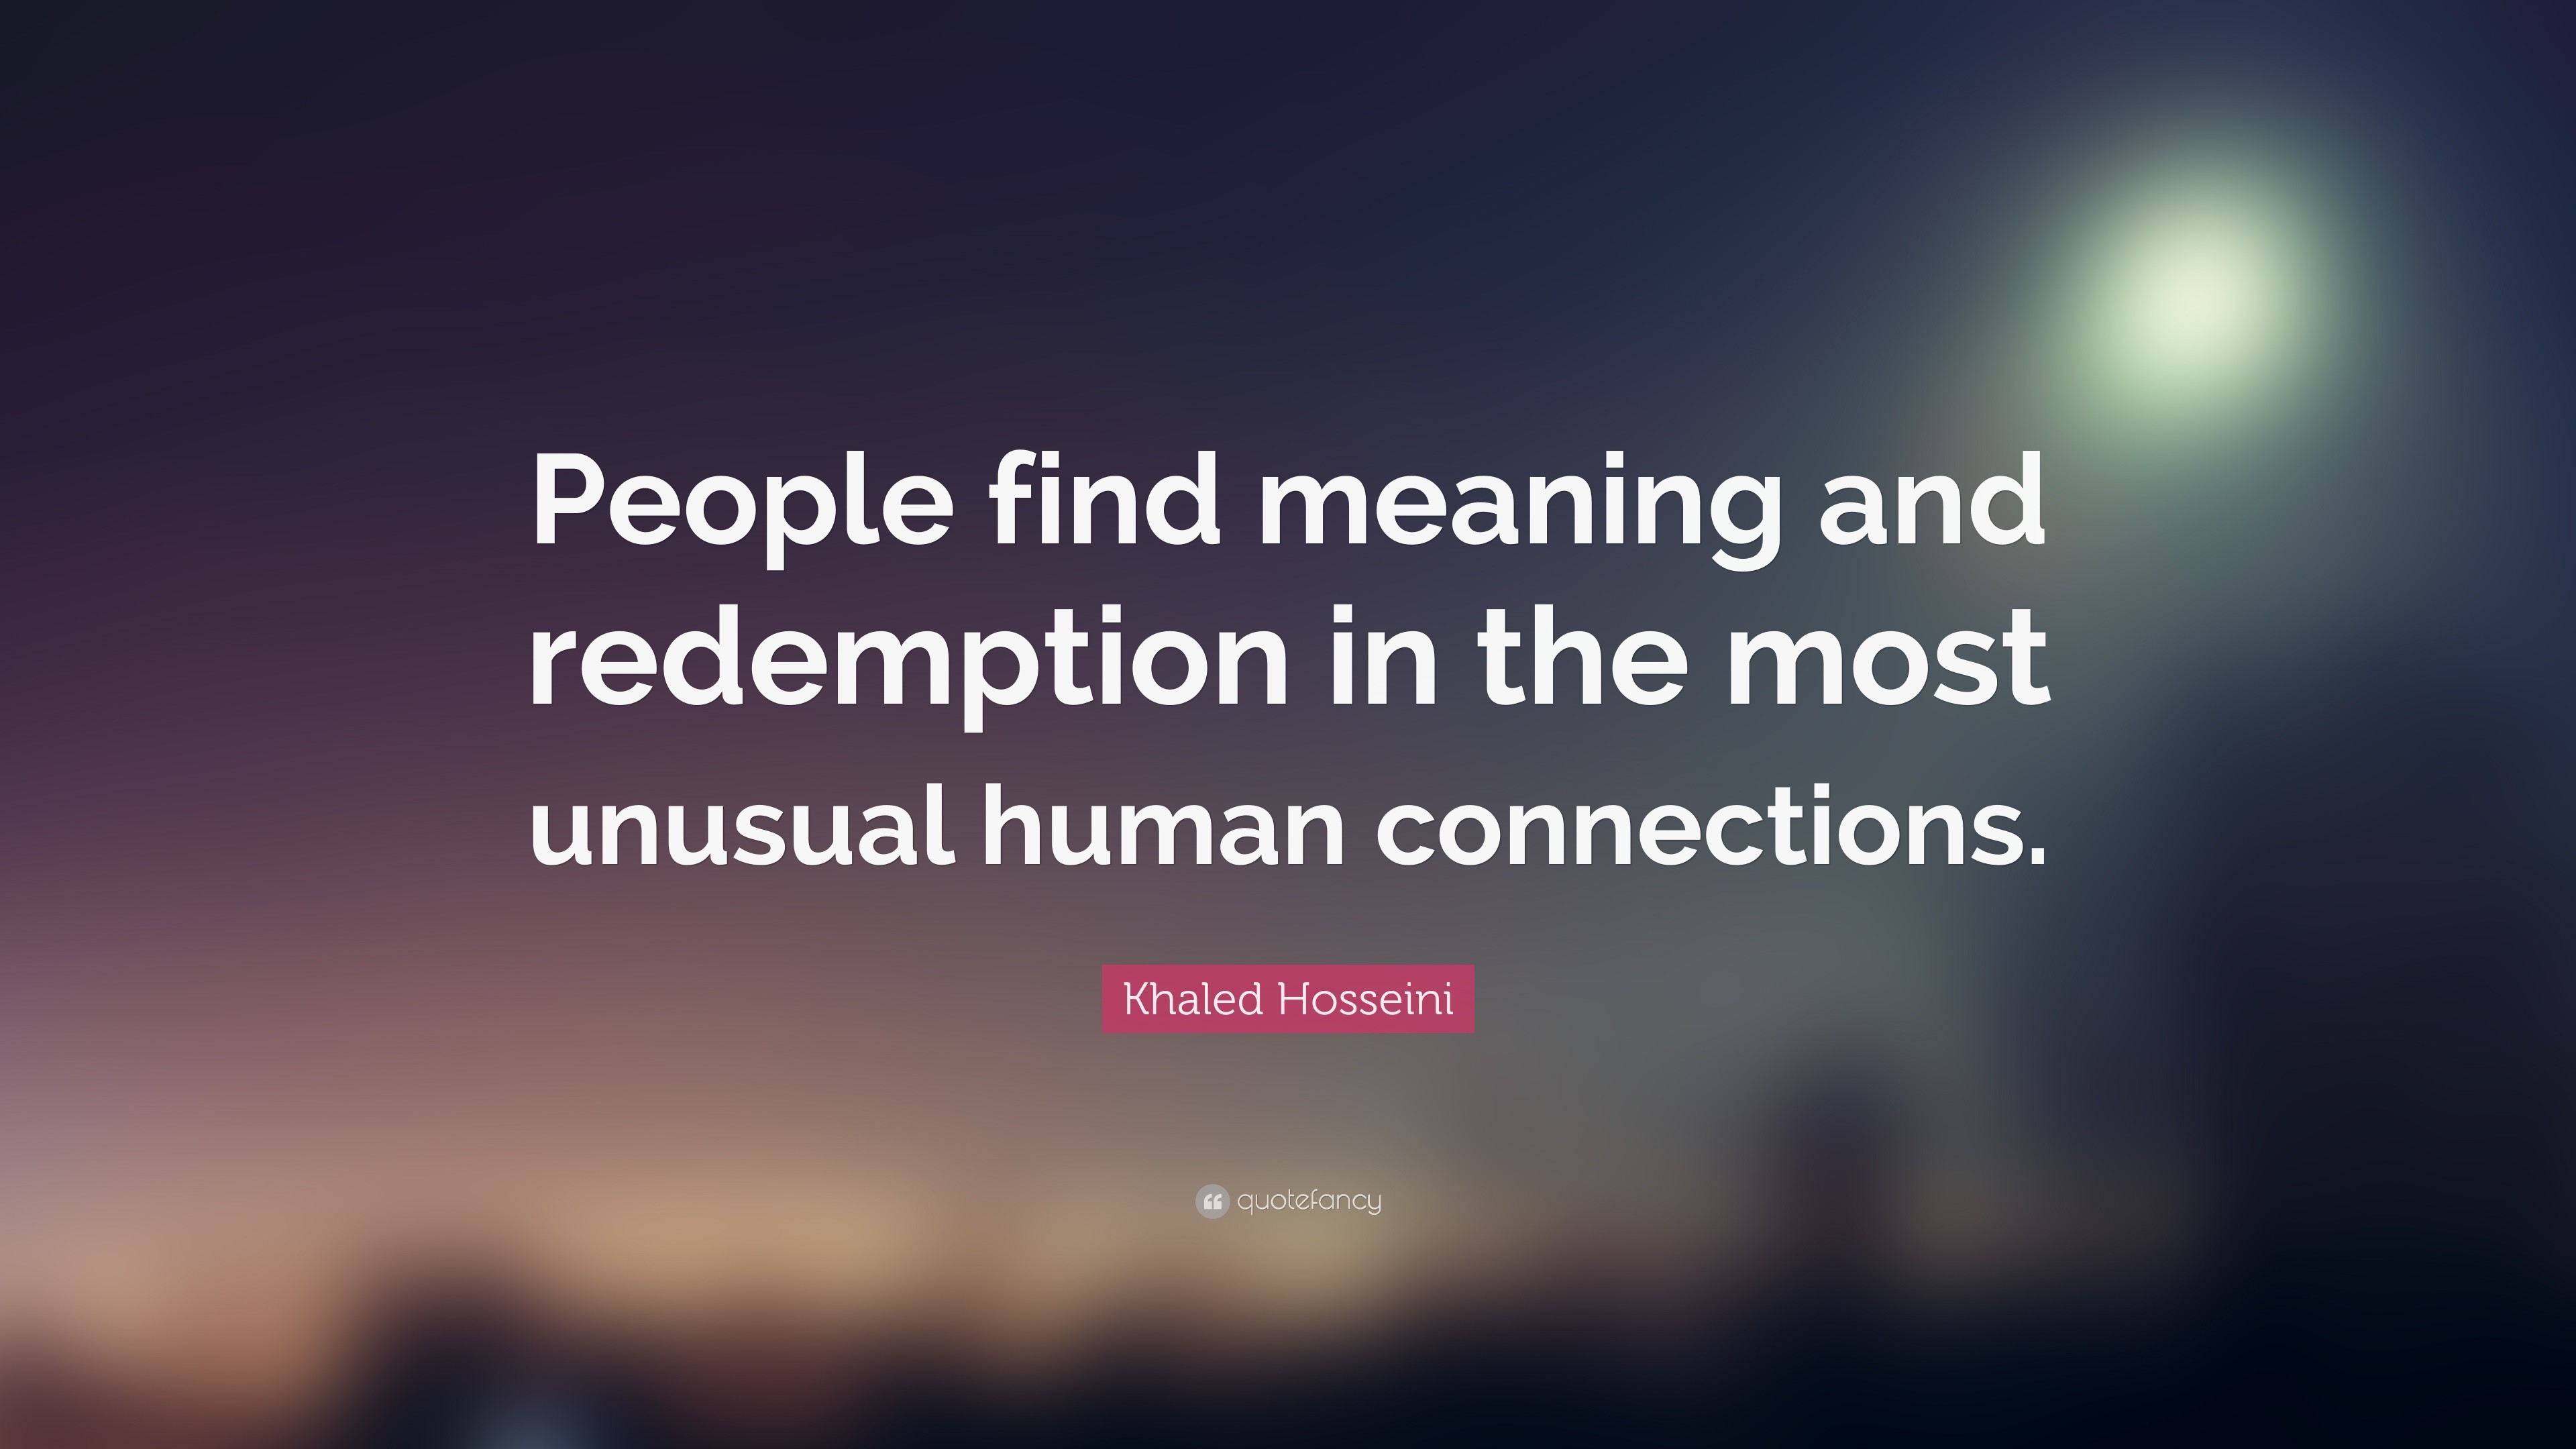 3840x2160 Khaled Hosseini Quote: “People find meaning and redemption in the most  unusual human connections